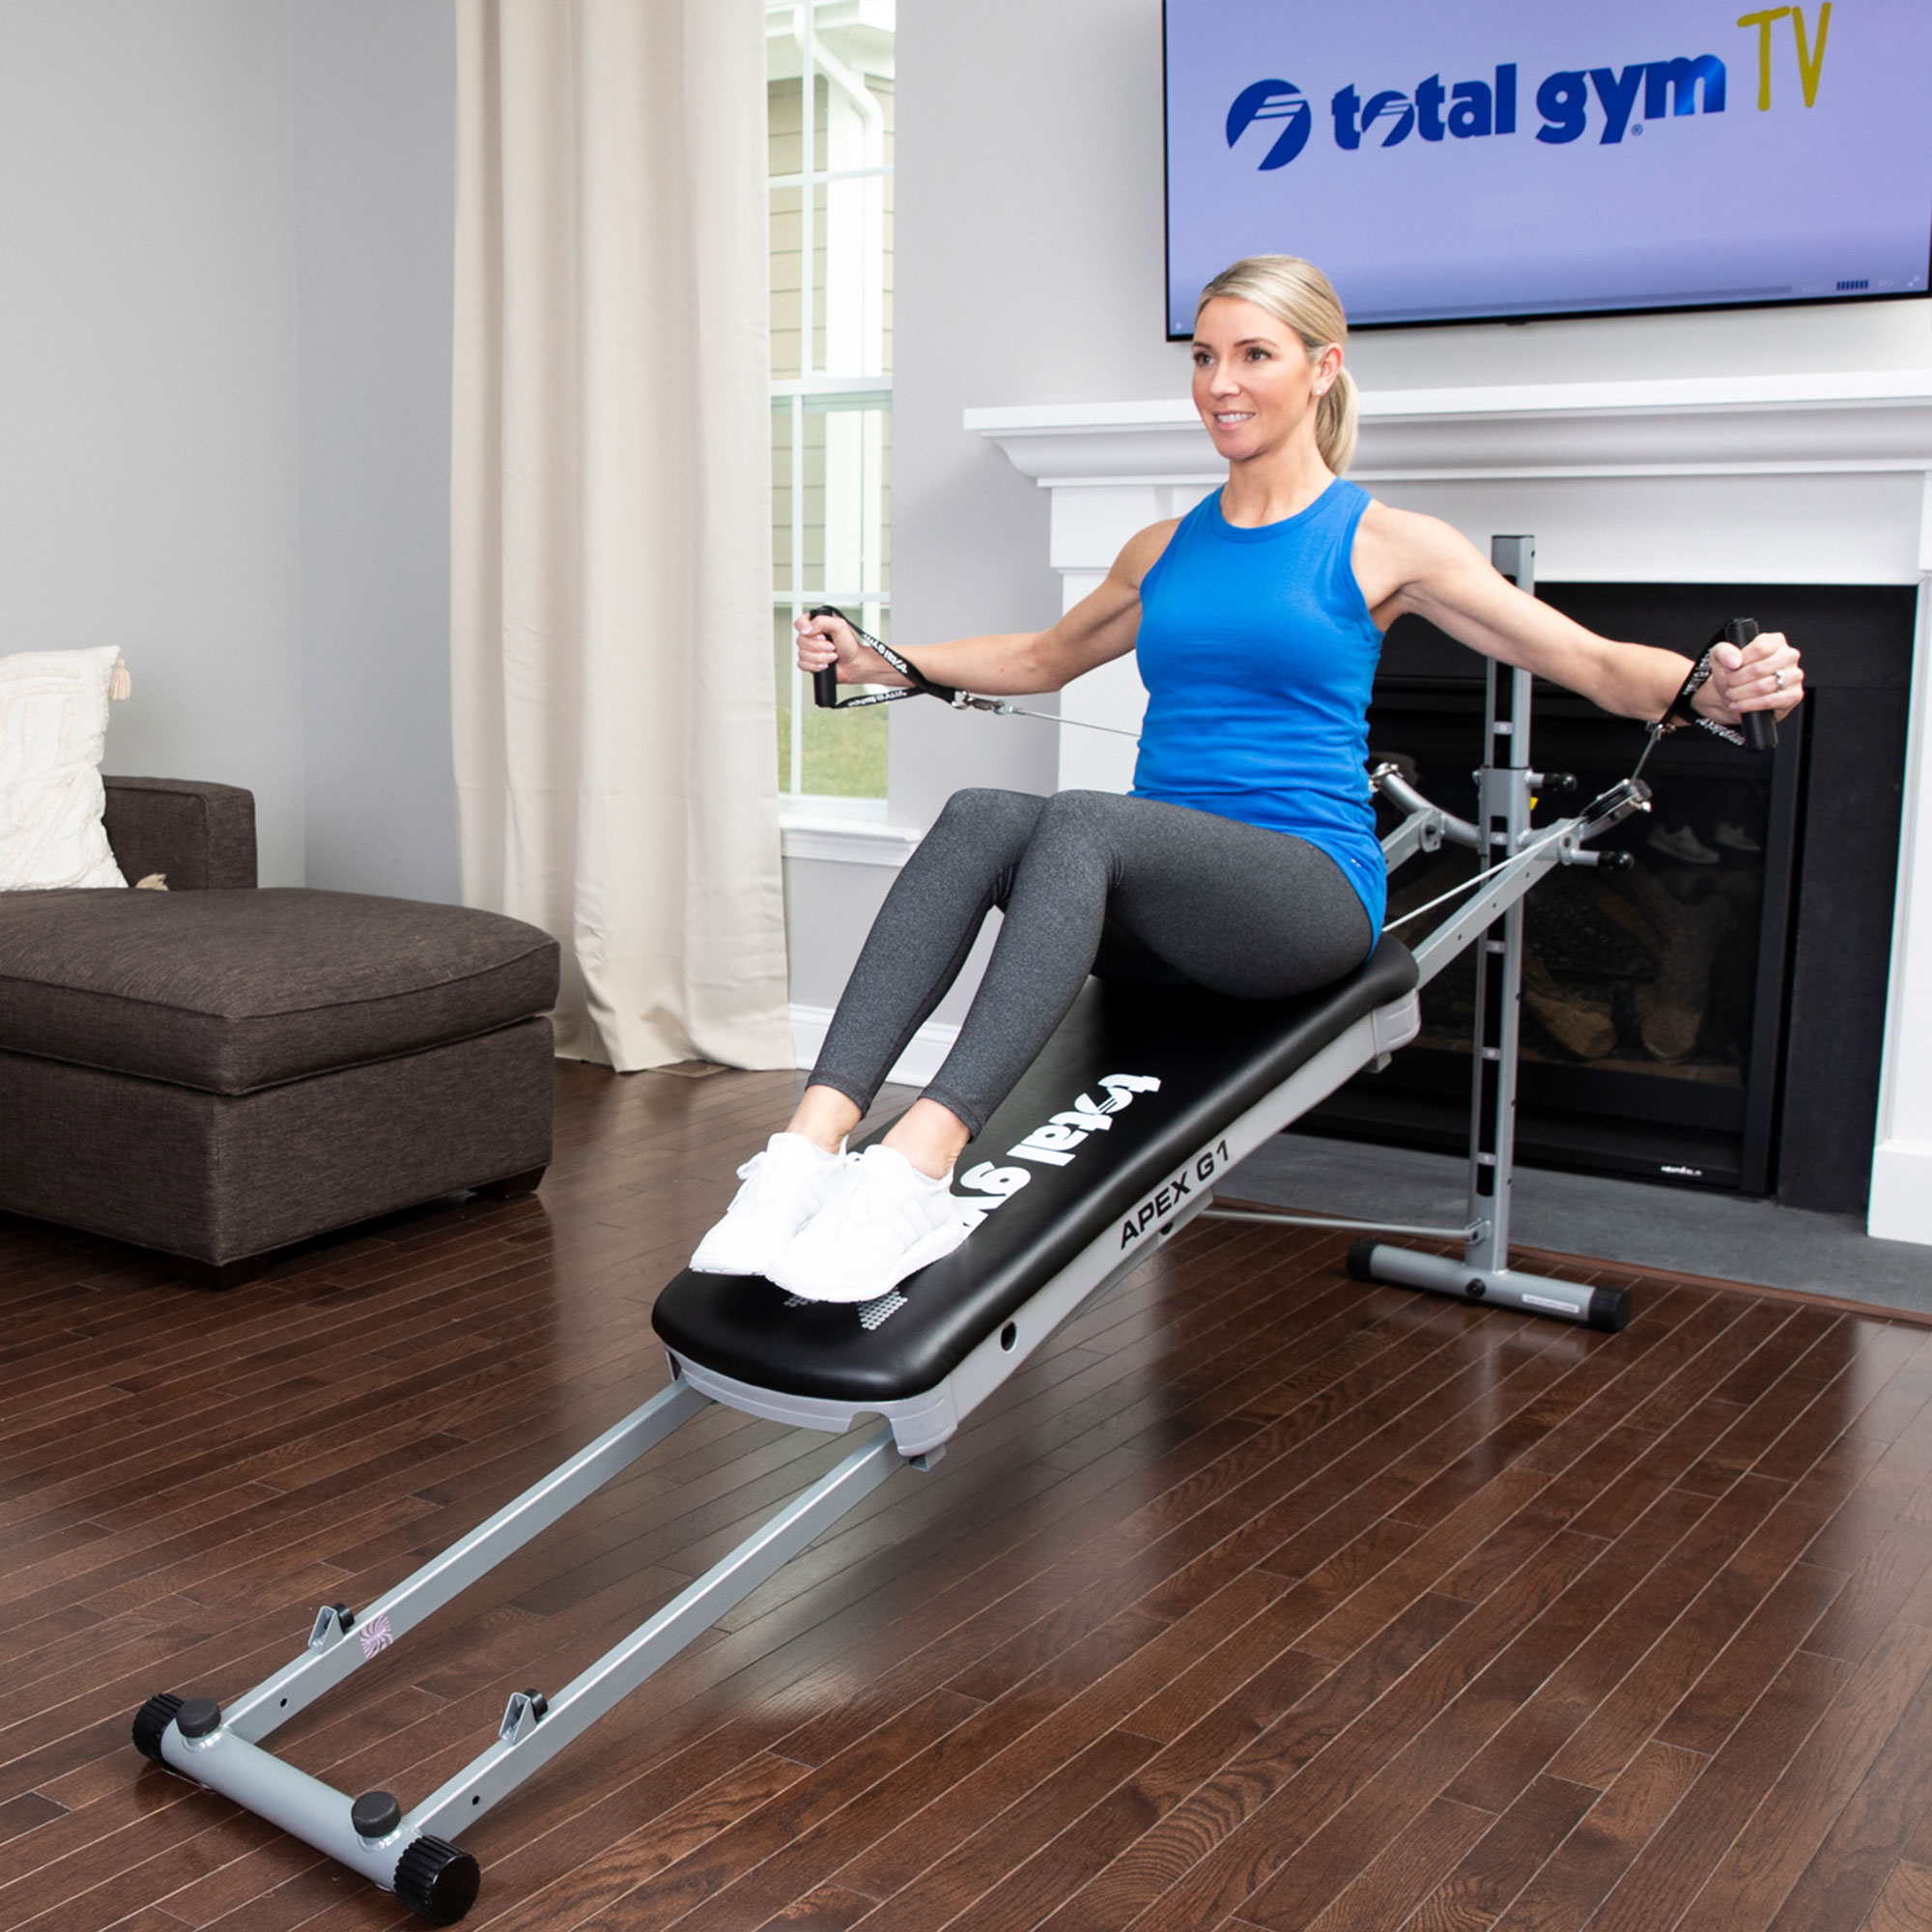 Total Gym APEX G1 Home Fitness Incline Weight Training w/Resistance Levels - image 4 of 12